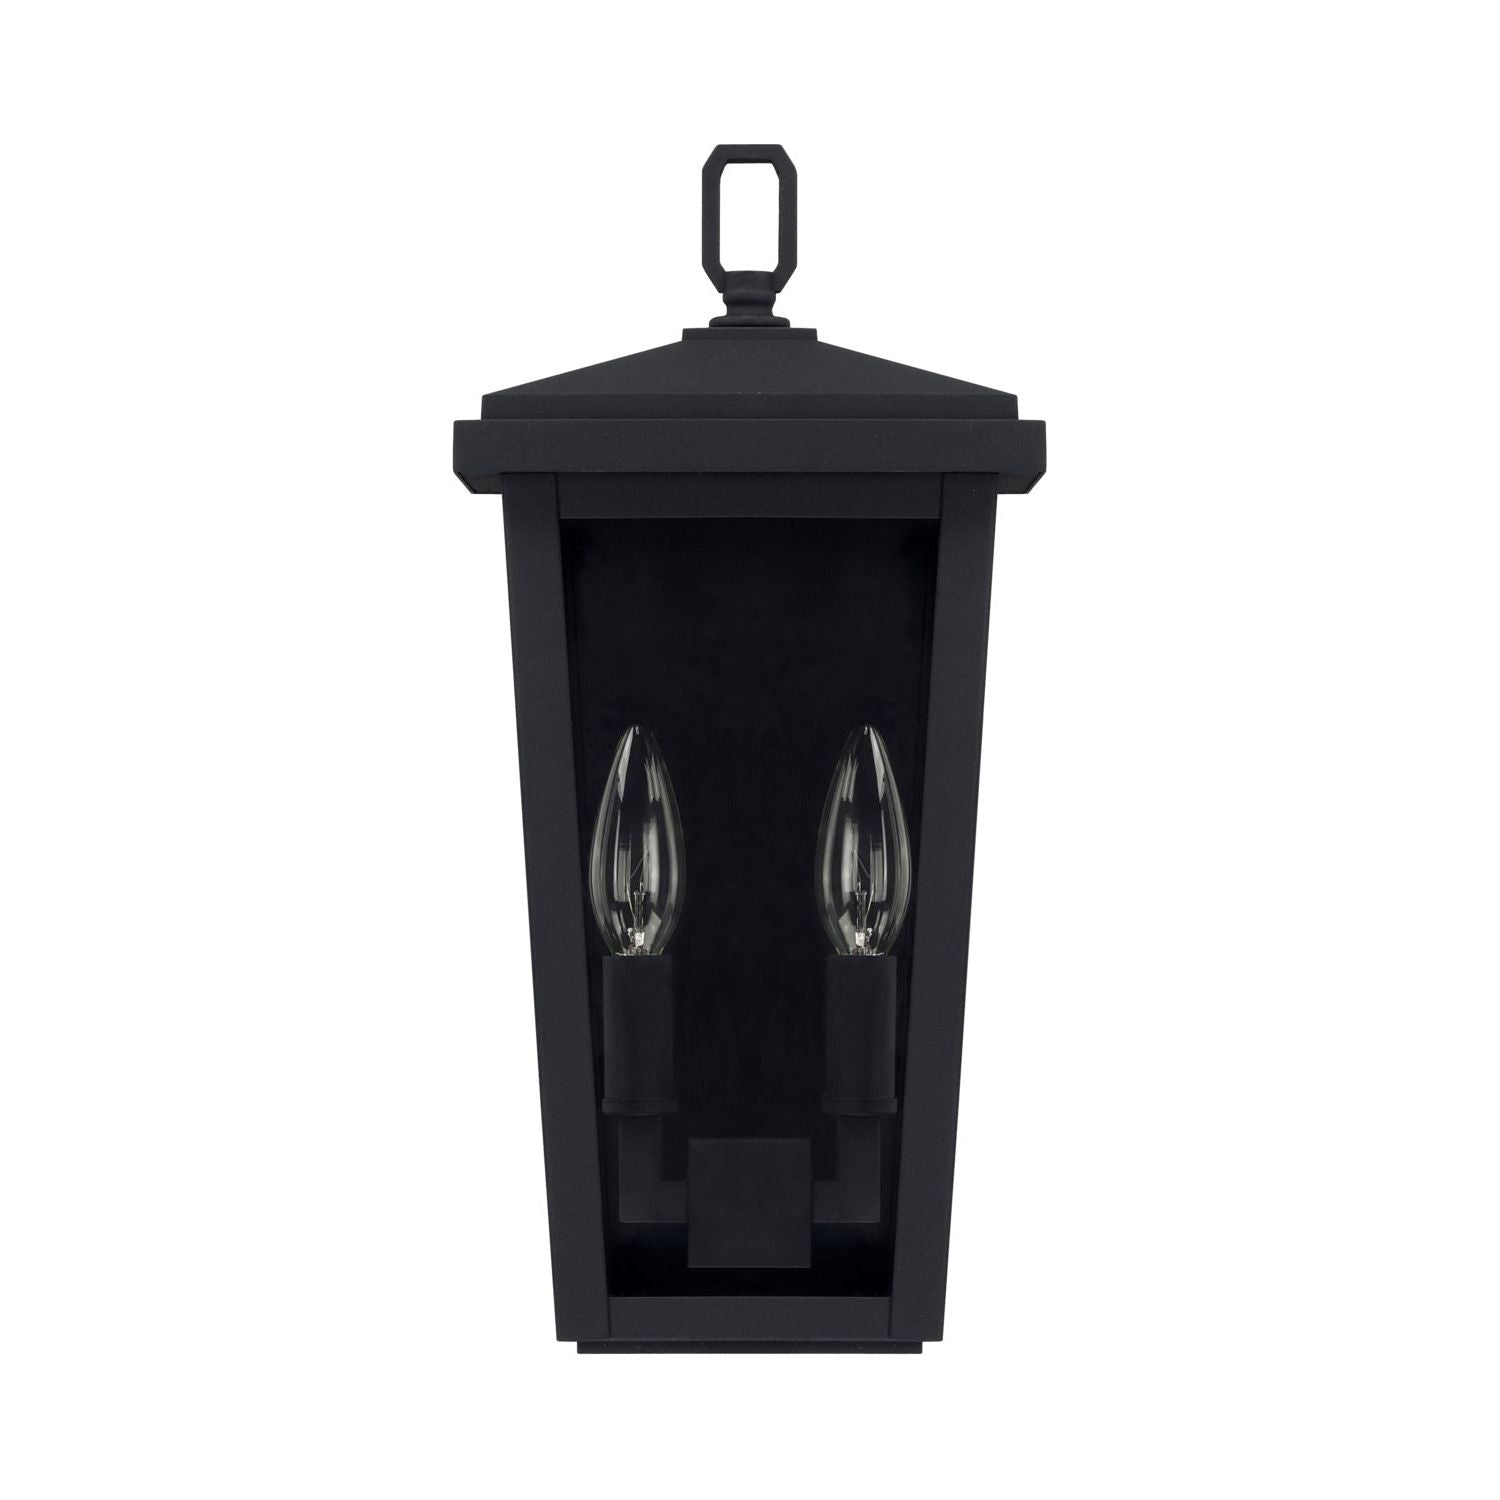 Donnelly 2-Light Outdoor Wall Lantern